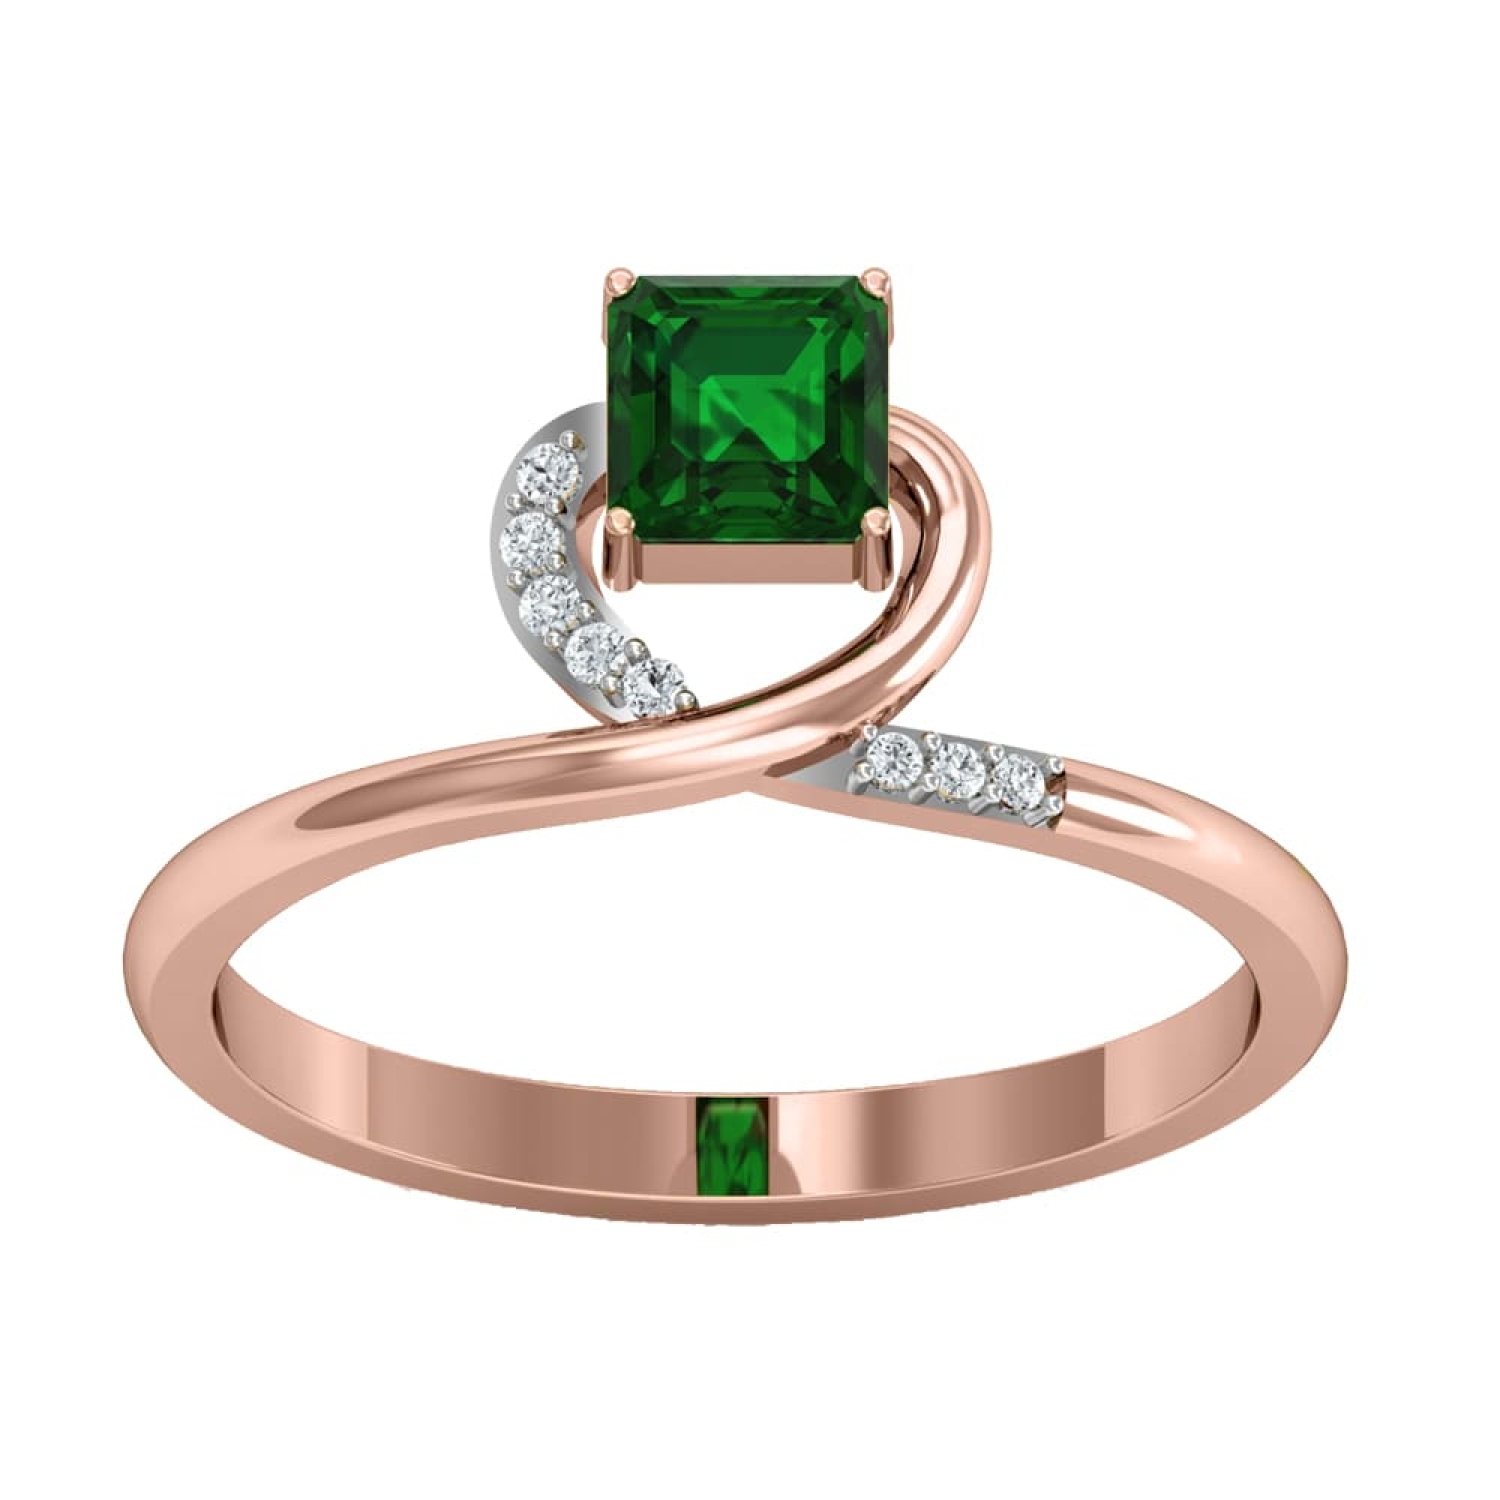 Buy Emerald Stacking Ring, Dainty Emerald Ring, May Birthstone Ring,  Minimalist Ring, Green Crystal Ring, Unique Promise Ring, Engagement Ring  Online in India - Etsy